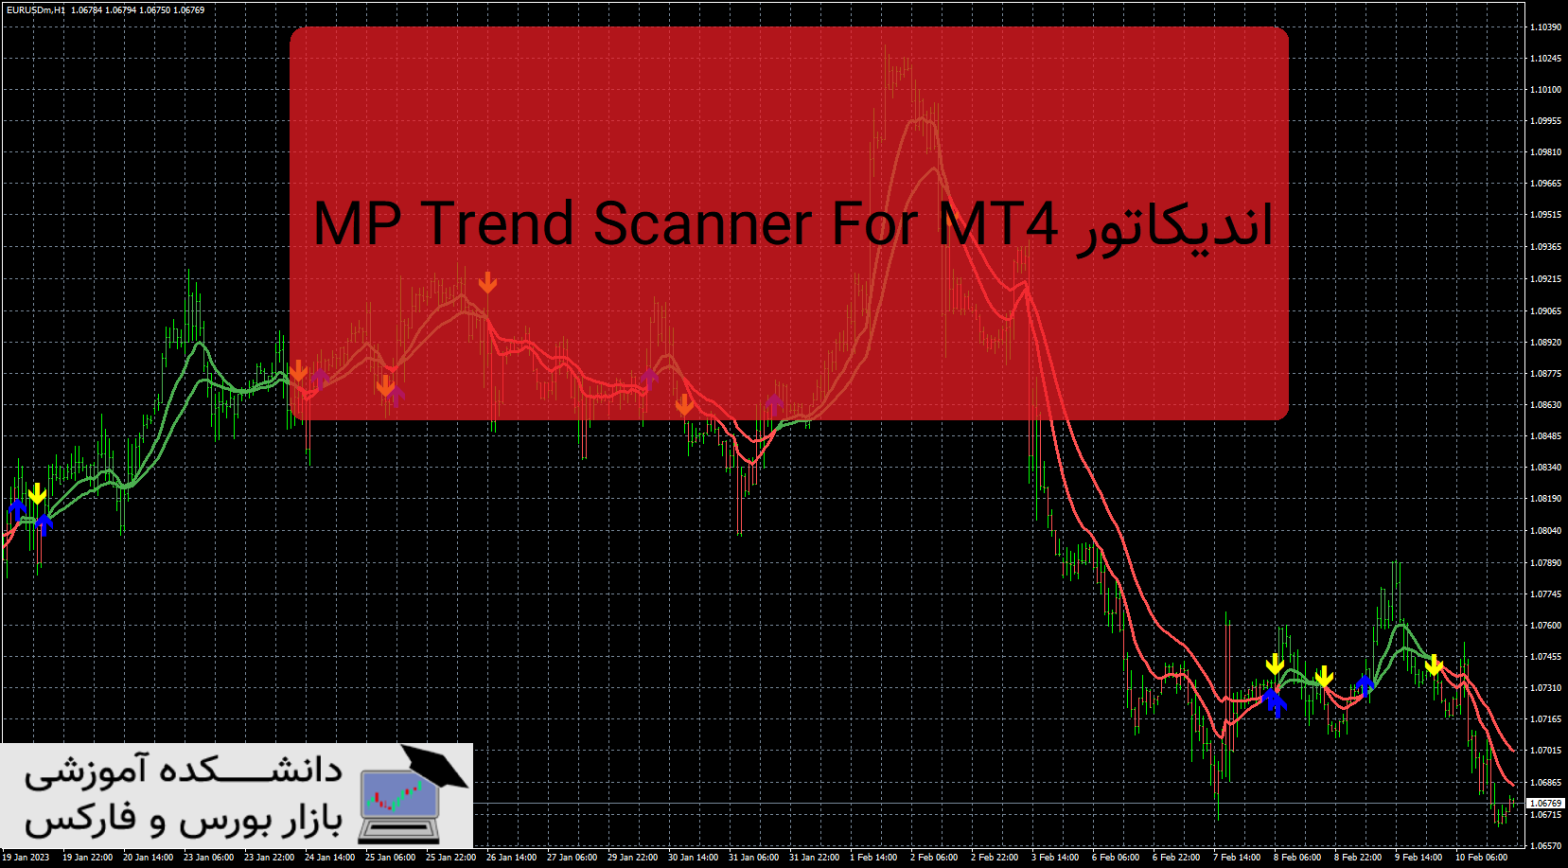 MP Trend Scanner For MT4 دانلود اندیکاتور